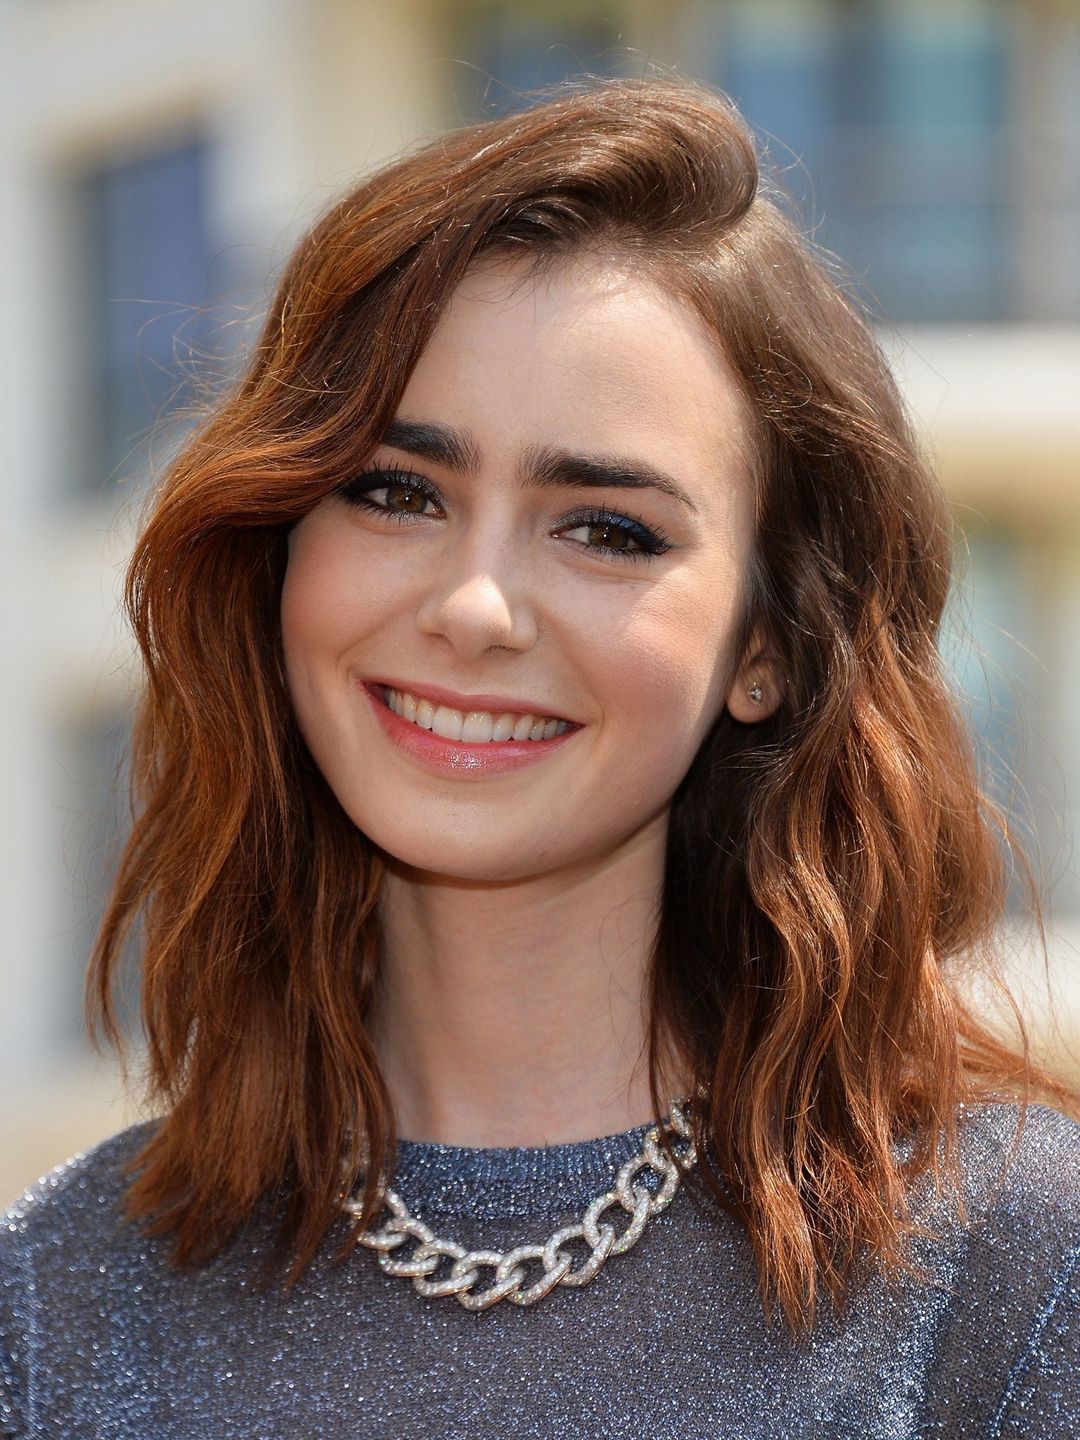 Lily Collins in her youth